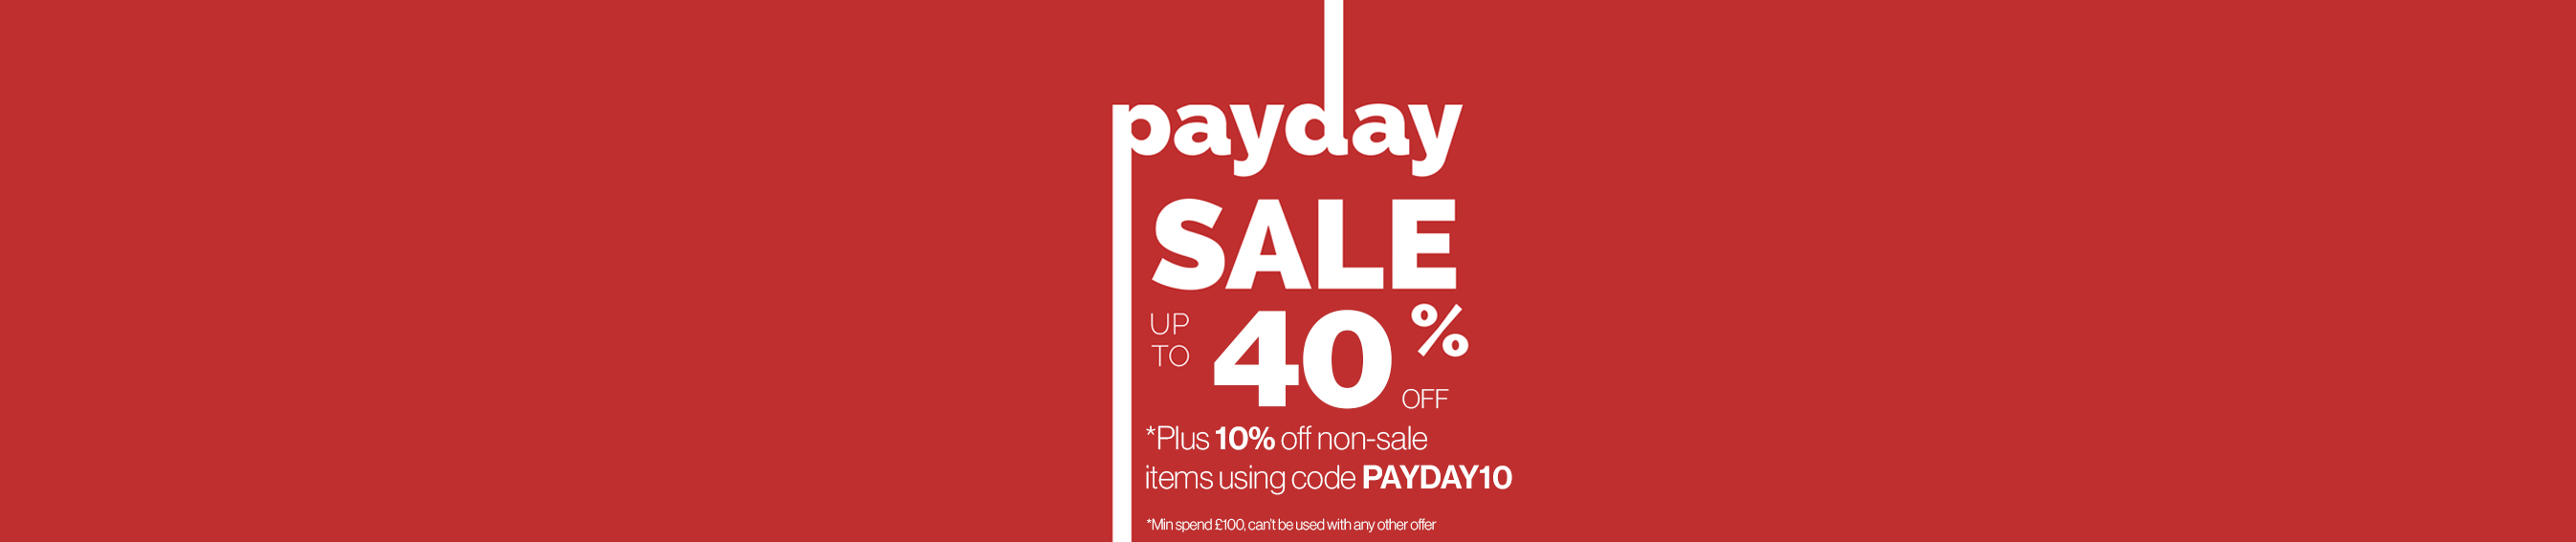 Payday Sale - Up to 40% off